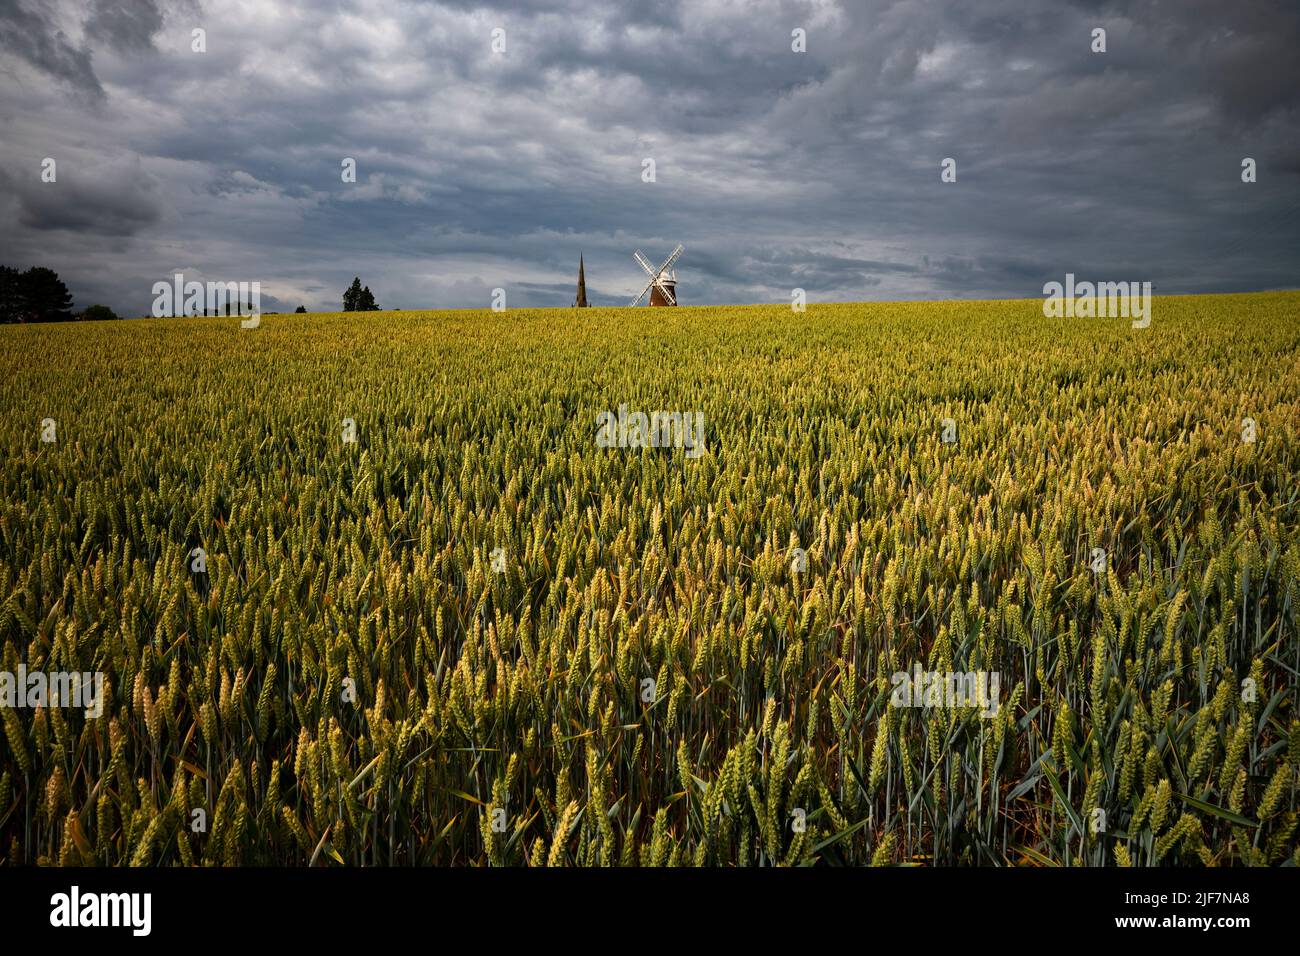 Thaxted, UK. 30th June, 2022. Thaxted Essex England UK Wheat Rippens under a stormy threatening sky 30 June 2022 Wheat waiting for some rain in North West Essex with Thaxted Church and John Webbs 19th century Windmill on the horizon. Credit: BRIAN HARRIS/Alamy Live News Stock Photo